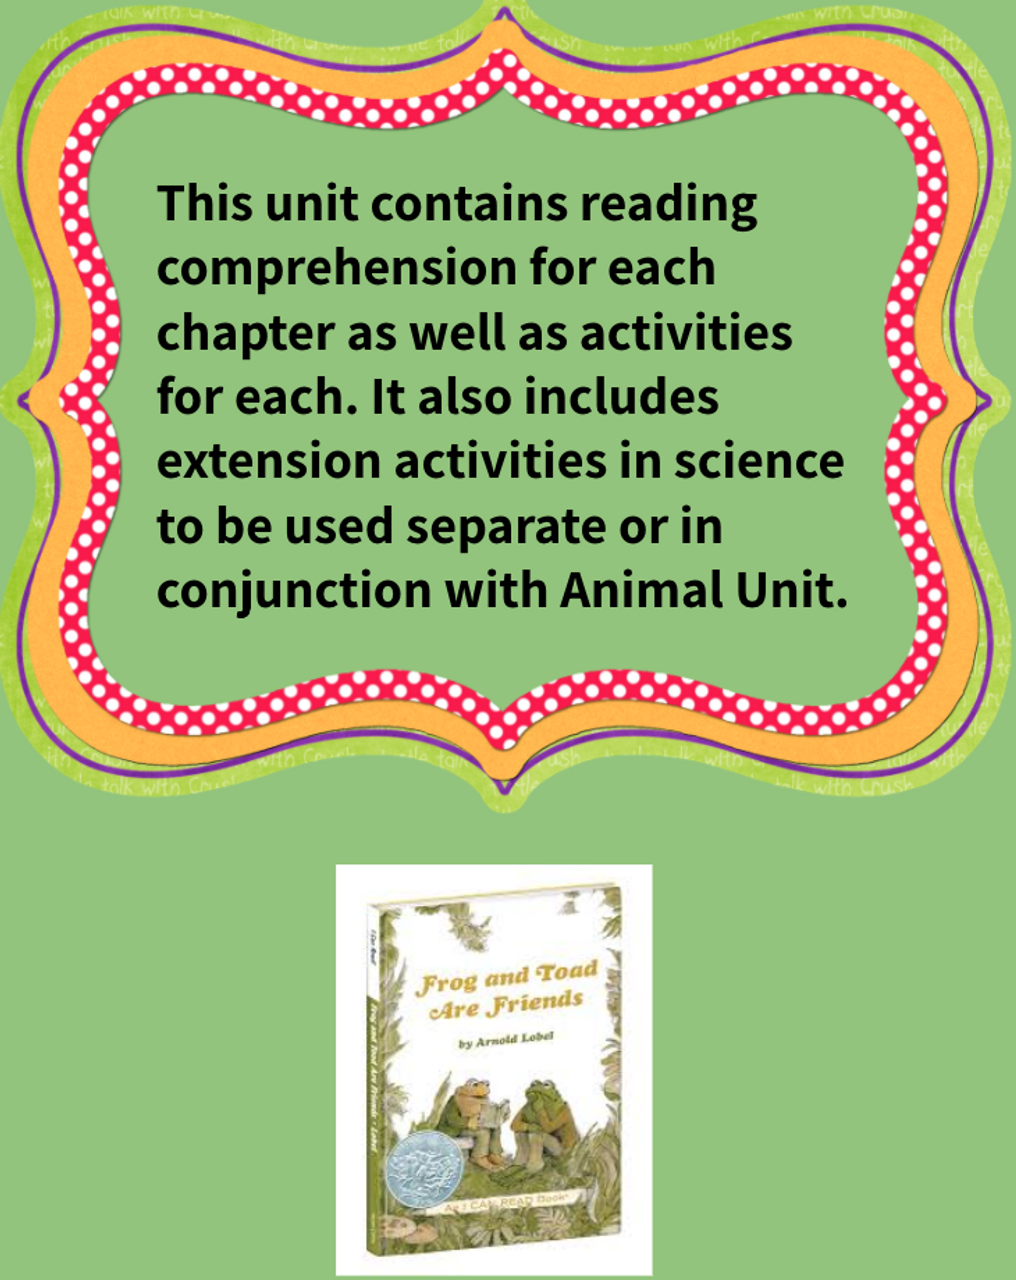 FROG & TOAD ARE FRIENDS READING & ACTIVITIES UNIT